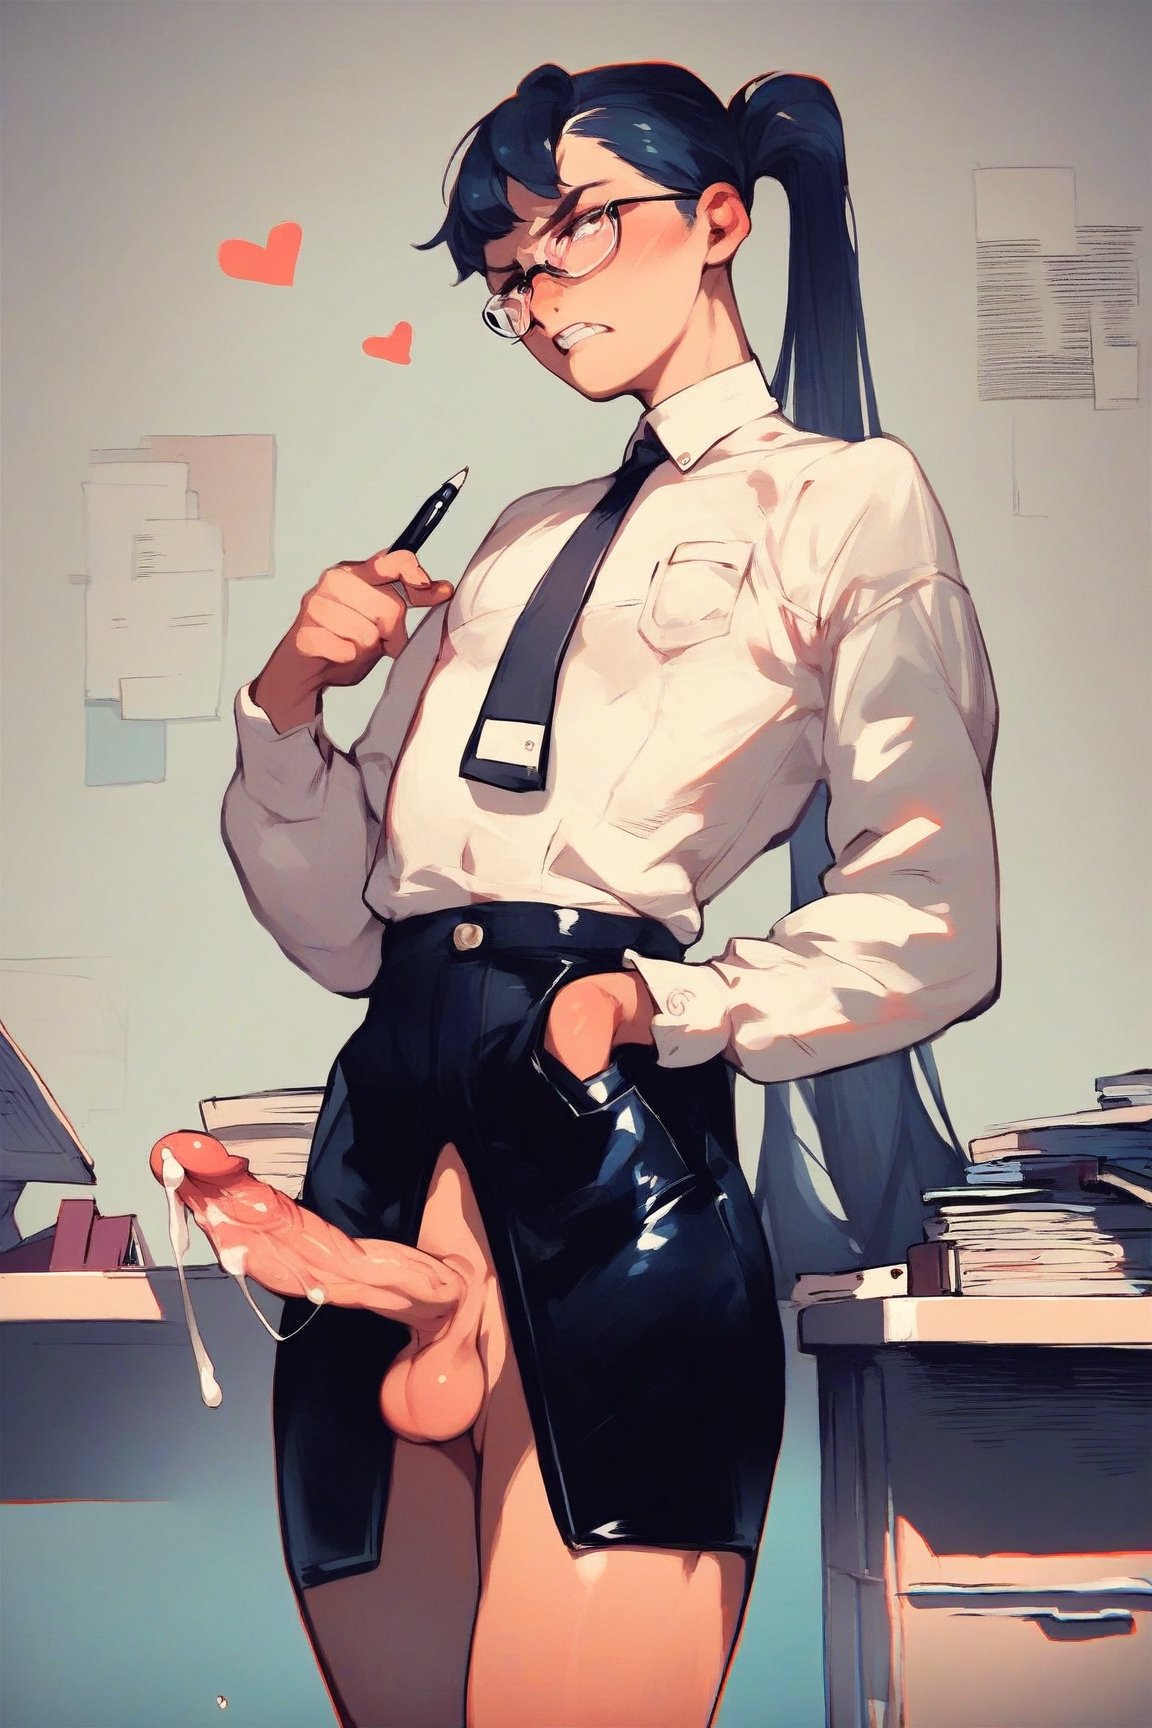  score_9, score_8_up, score_7_up, score_6_up, score_5_up, score_4_up, source_cartoon, source_anime, rating_explicit, femboys in office, otoko no ko, tight button down crop blouse, pocket protector with pens, office background, IT department, long hair, long ponytail, glasses, teeth clenched, nerd girl, standing, flacid penis, testicles, serious, hearts, motion, (dripping cum)